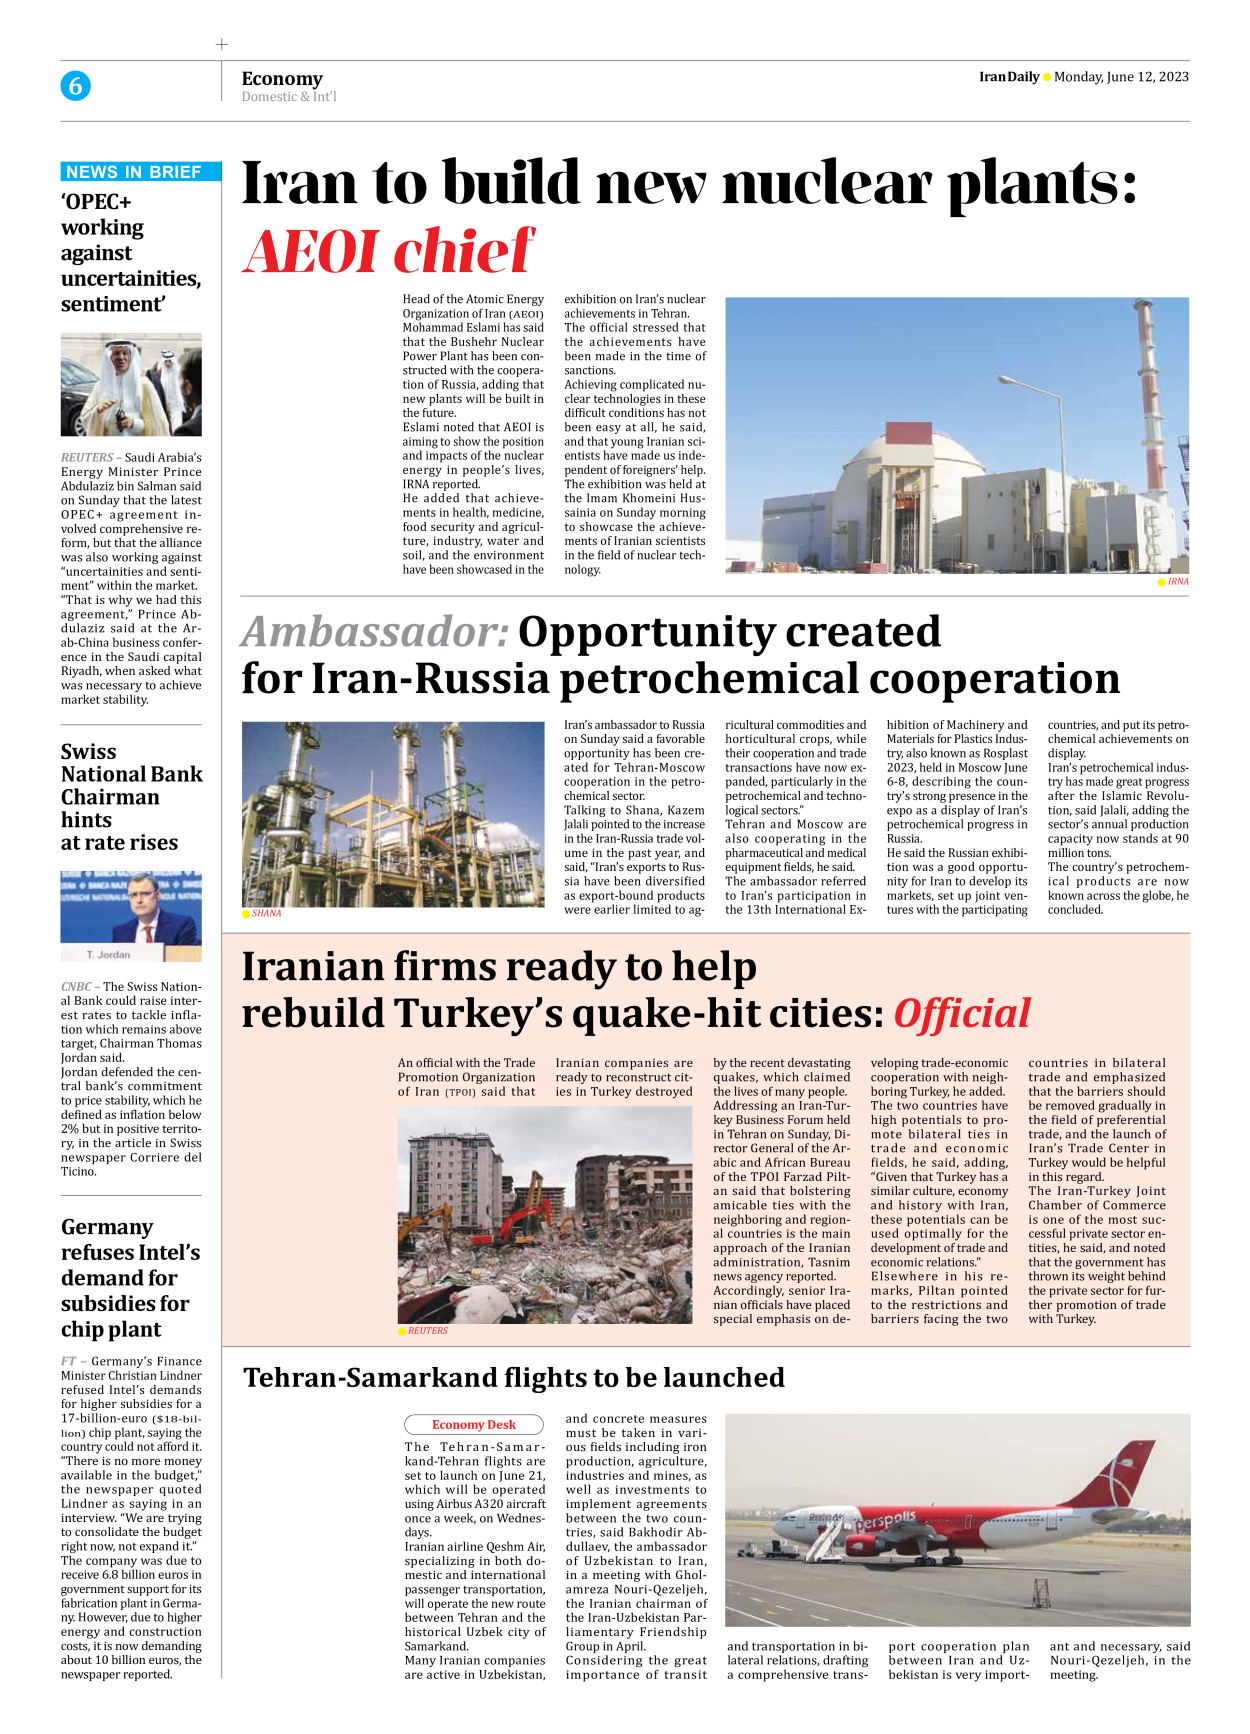 Iran Daily - Number Seven Thousand Three Hundred and Twelve - 12 June 2023 - Page 6